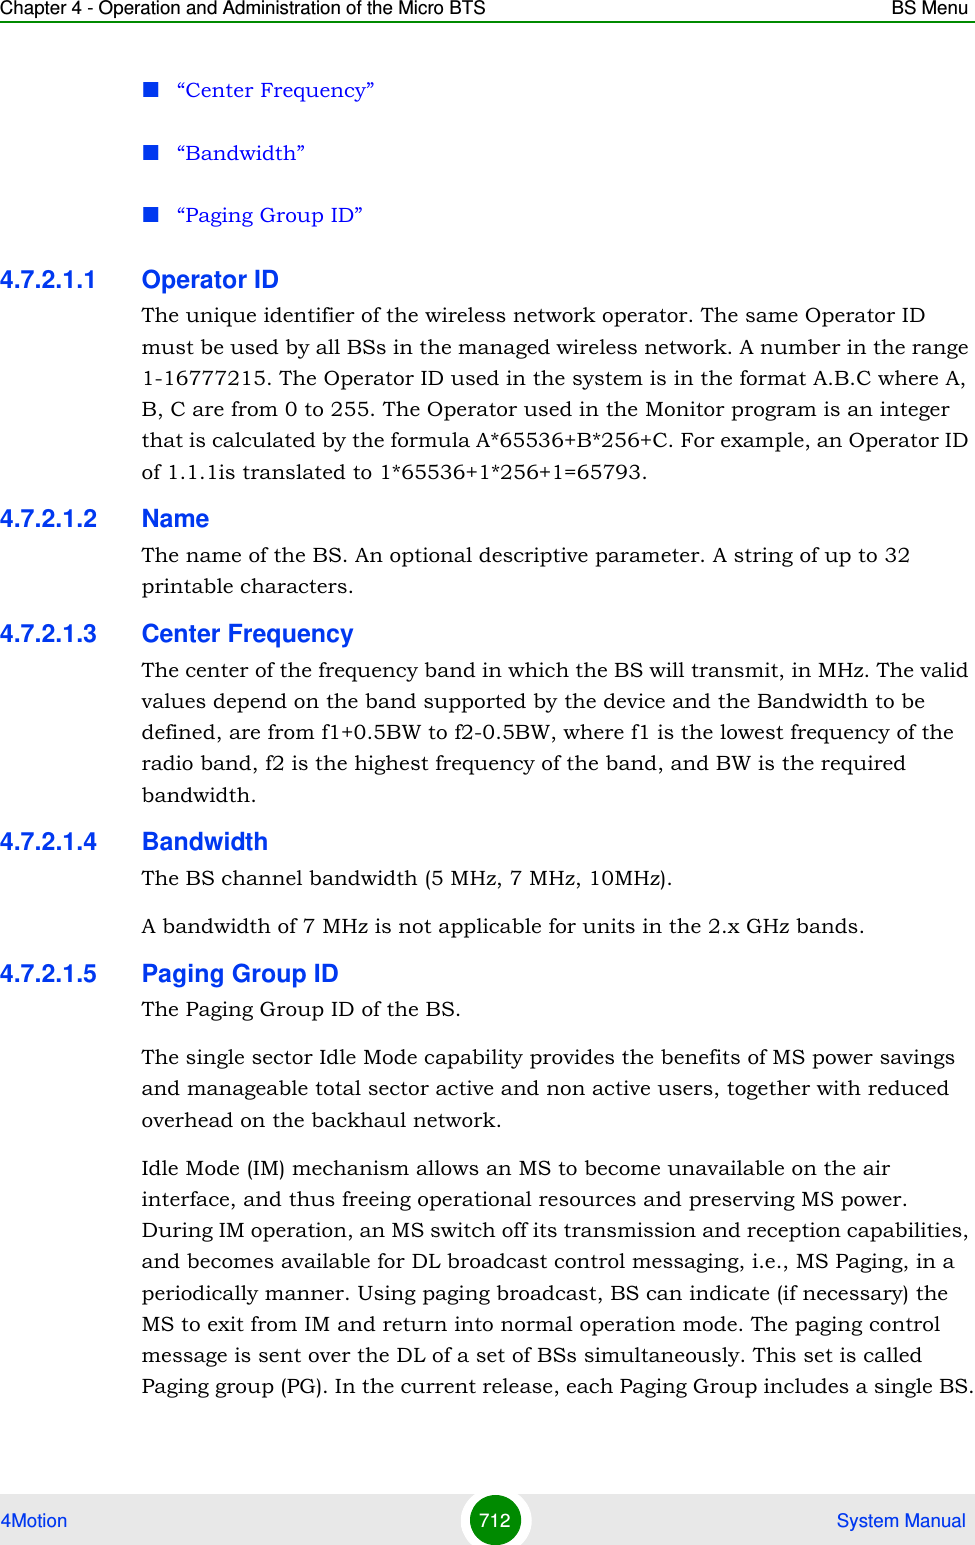 Chapter 4 - Operation and Administration of the Micro BTS BS Menu4Motion 712  System Manual“Center Frequency”“Bandwidth”“Paging Group ID”4.7.2.1.1 Operator IDThe unique identifier of the wireless network operator. The same Operator ID must be used by all BSs in the managed wireless network. A number in the range 1-16777215. The Operator ID used in the system is in the format A.B.C where A, B, C are from 0 to 255. The Operator used in the Monitor program is an integer that is calculated by the formula A*65536+B*256+C. For example, an Operator ID of 1.1.1is translated to 1*65536+1*256+1=65793.4.7.2.1.2 NameThe name of the BS. An optional descriptive parameter. A string of up to 32 printable characters.4.7.2.1.3 Center FrequencyThe center of the frequency band in which the BS will transmit, in MHz. The valid values depend on the band supported by the device and the Bandwidth to be defined, are from f1+0.5BW to f2-0.5BW, where f1 is the lowest frequency of the radio band, f2 is the highest frequency of the band, and BW is the required bandwidth.4.7.2.1.4 BandwidthThe BS channel bandwidth (5 MHz, 7 MHz, 10MHz).A bandwidth of 7 MHz is not applicable for units in the 2.x GHz bands.4.7.2.1.5 Paging Group IDThe Paging Group ID of the BS. The single sector Idle Mode capability provides the benefits of MS power savings and manageable total sector active and non active users, together with reduced overhead on the backhaul network.Idle Mode (IM) mechanism allows an MS to become unavailable on the air interface, and thus freeing operational resources and preserving MS power. During IM operation, an MS switch off its transmission and reception capabilities, and becomes available for DL broadcast control messaging, i.e., MS Paging, in a periodically manner. Using paging broadcast, BS can indicate (if necessary) the MS to exit from IM and return into normal operation mode. The paging control message is sent over the DL of a set of BSs simultaneously. This set is called Paging group (PG). In the current release, each Paging Group includes a single BS.